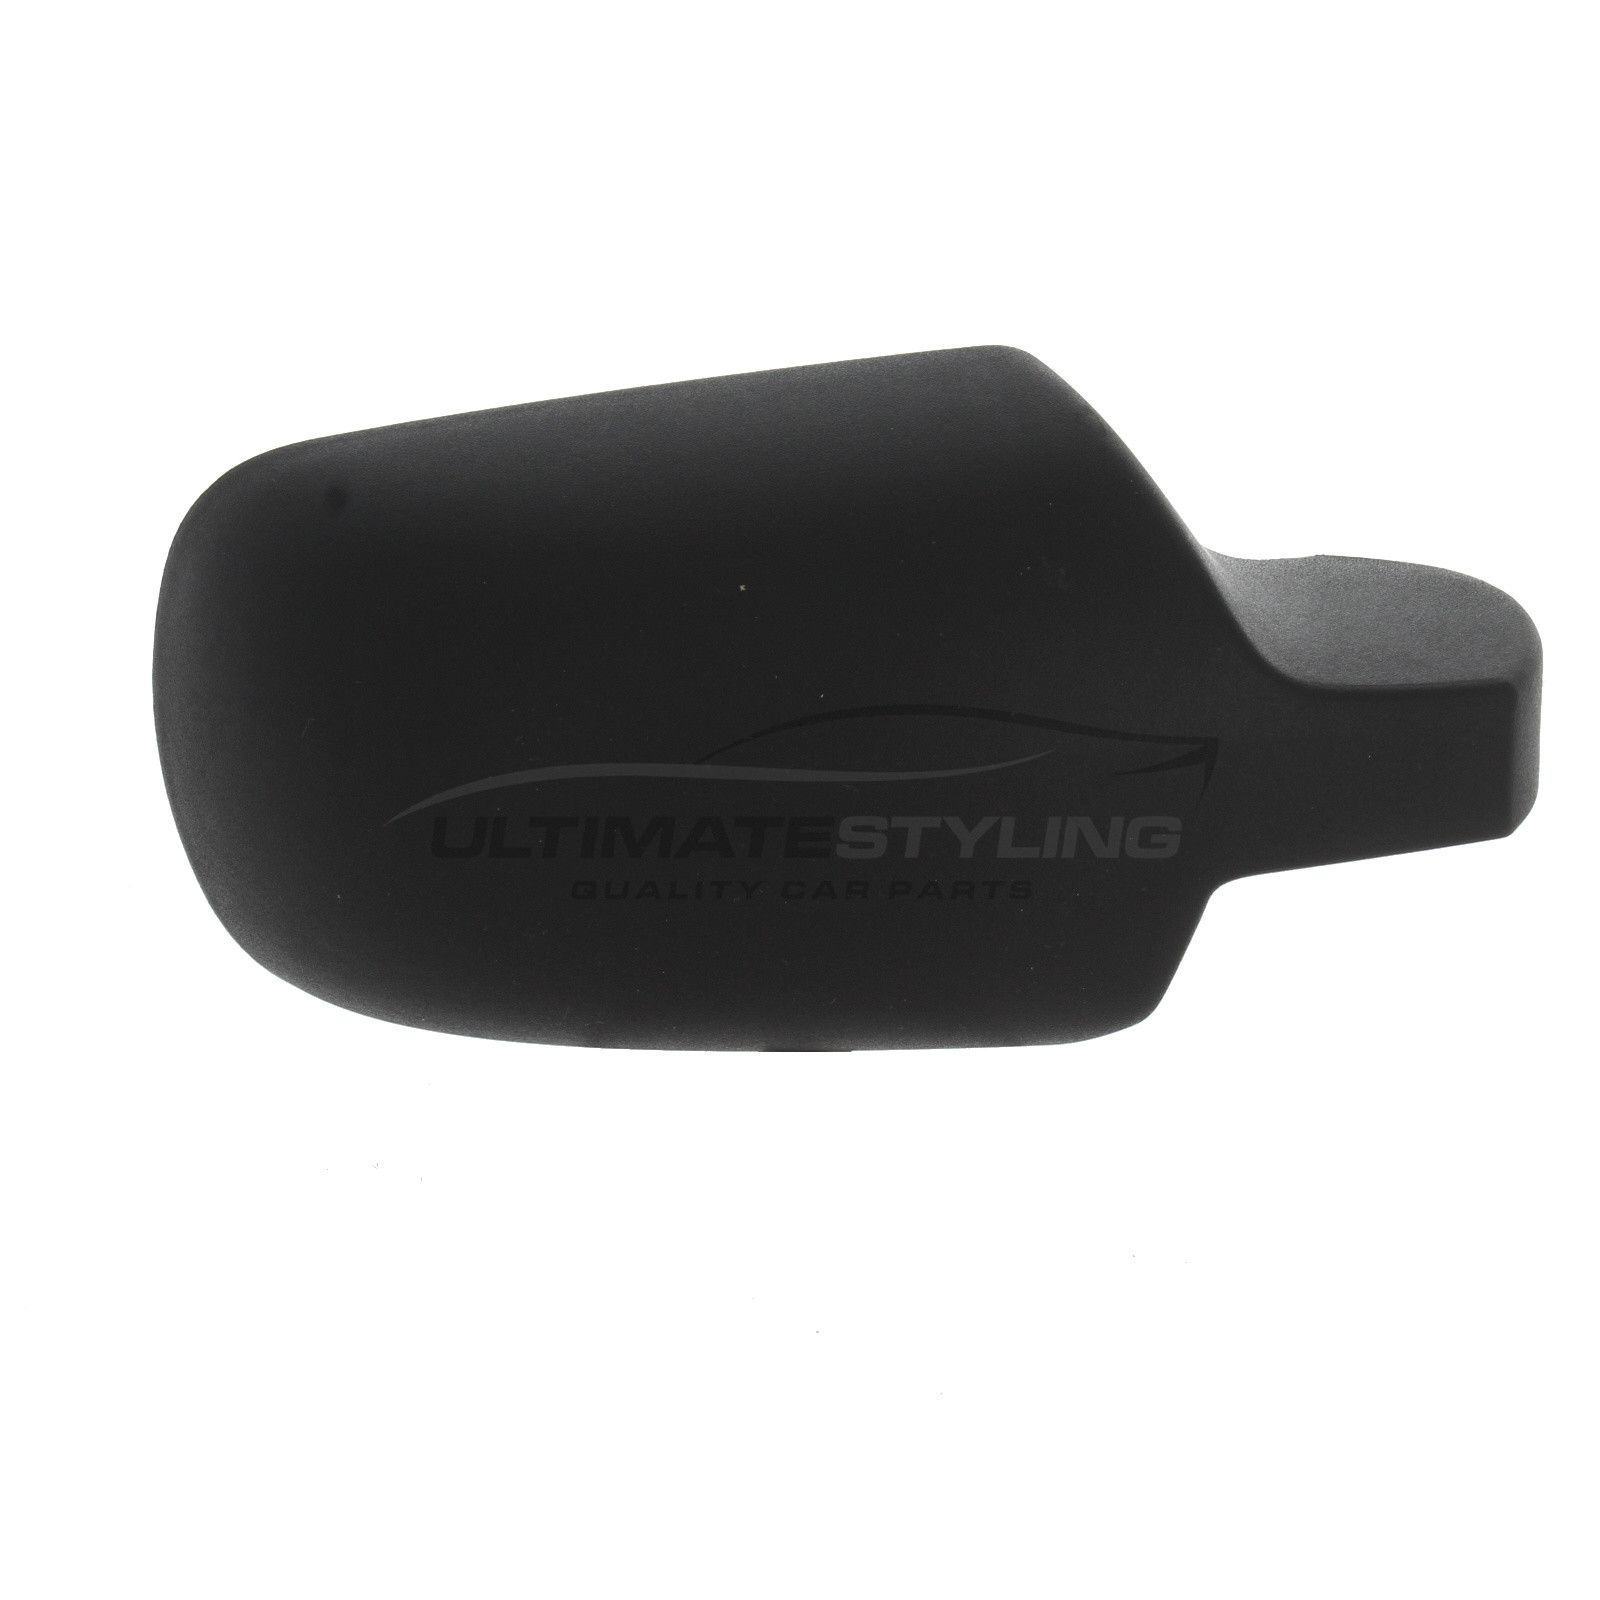 Wing Mirror Cover for Ford Fusion